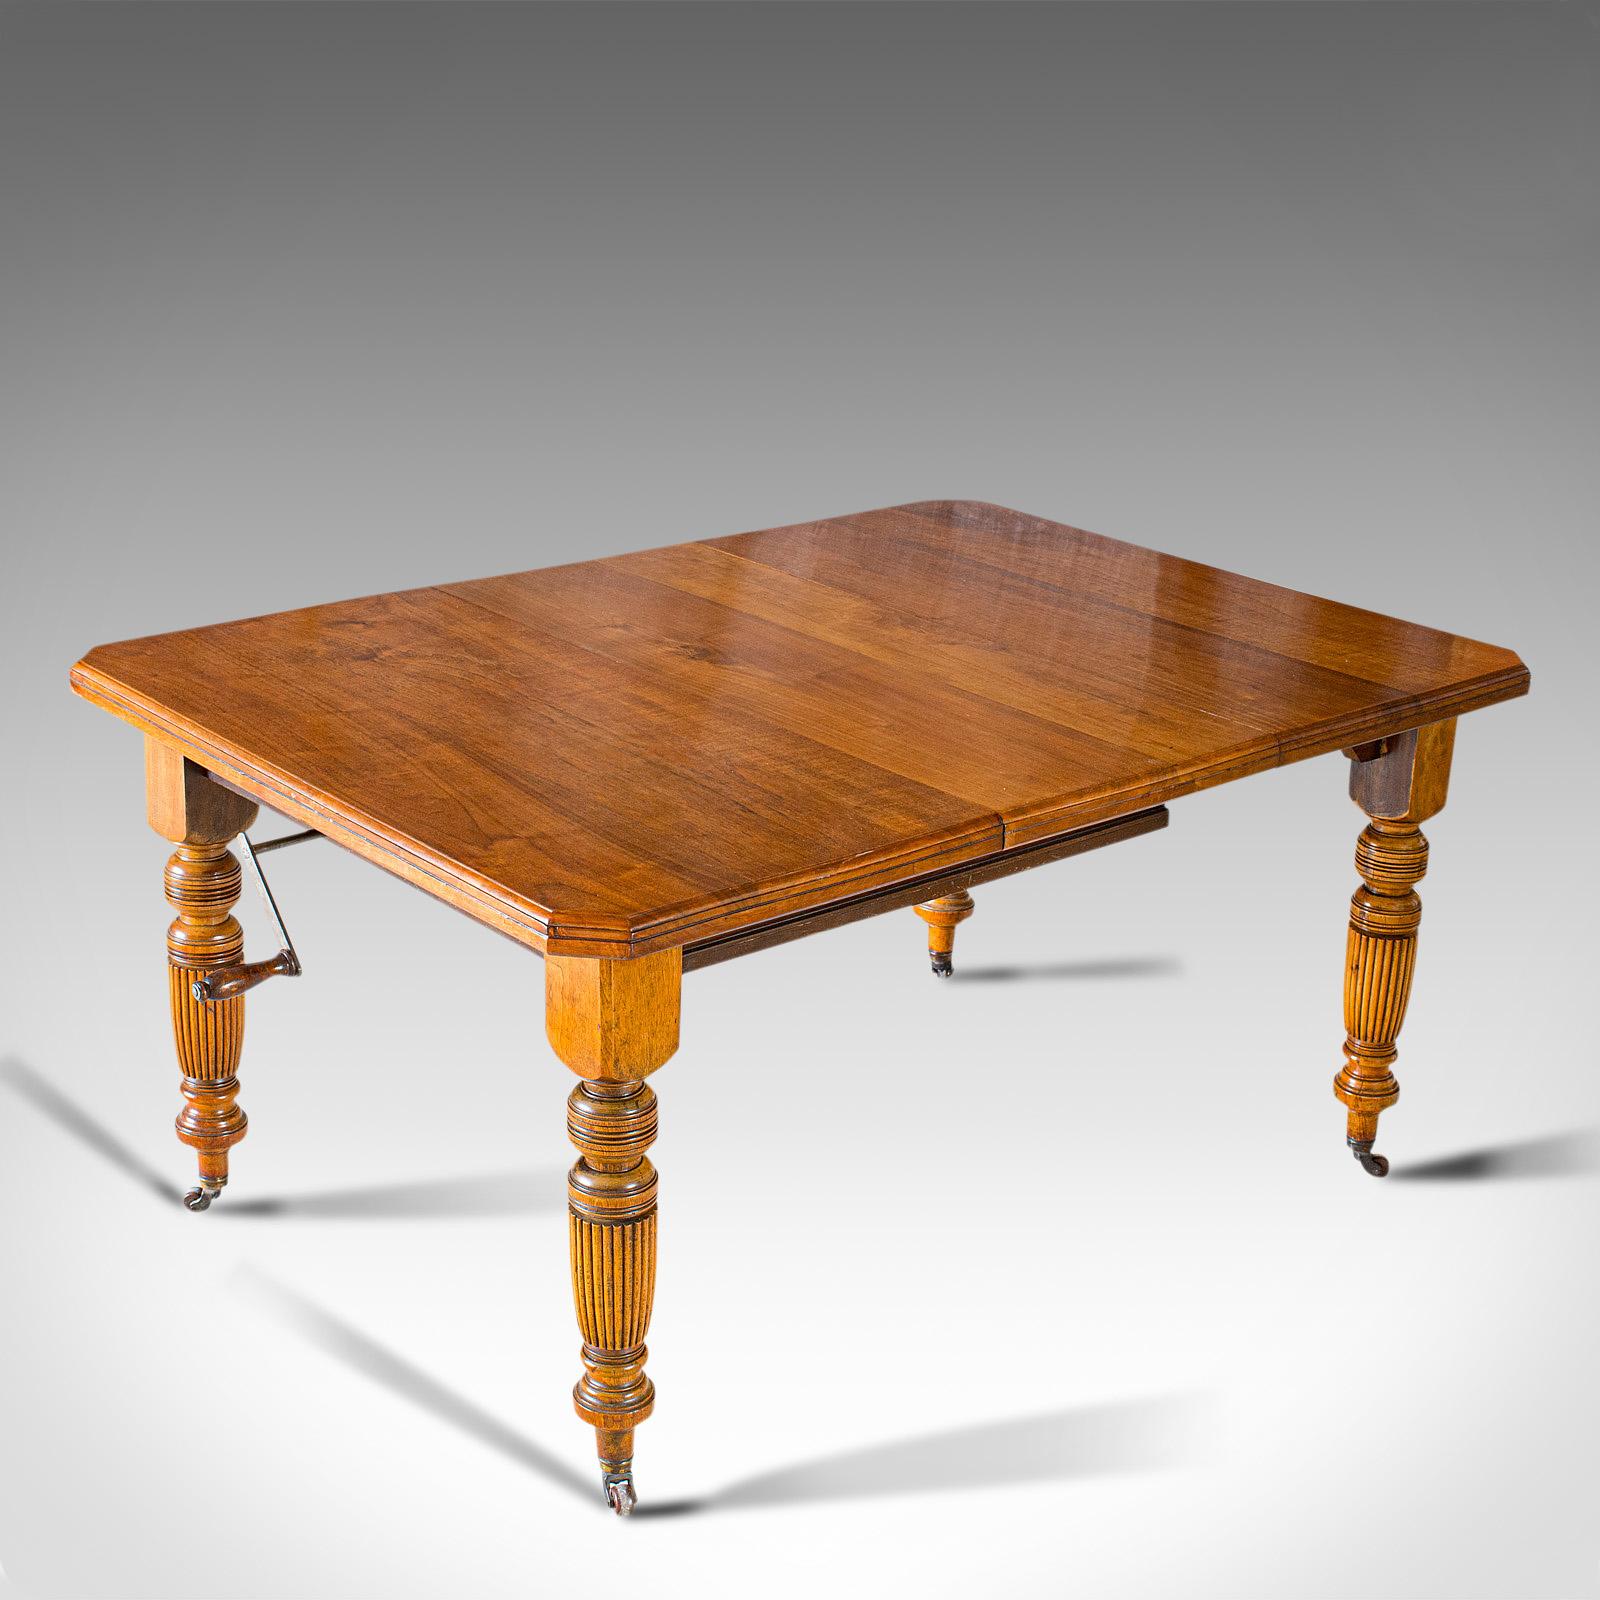 19th Century Antique Extending Dining Table, English, Walnut, Seats 4-6, Victorian, 1890